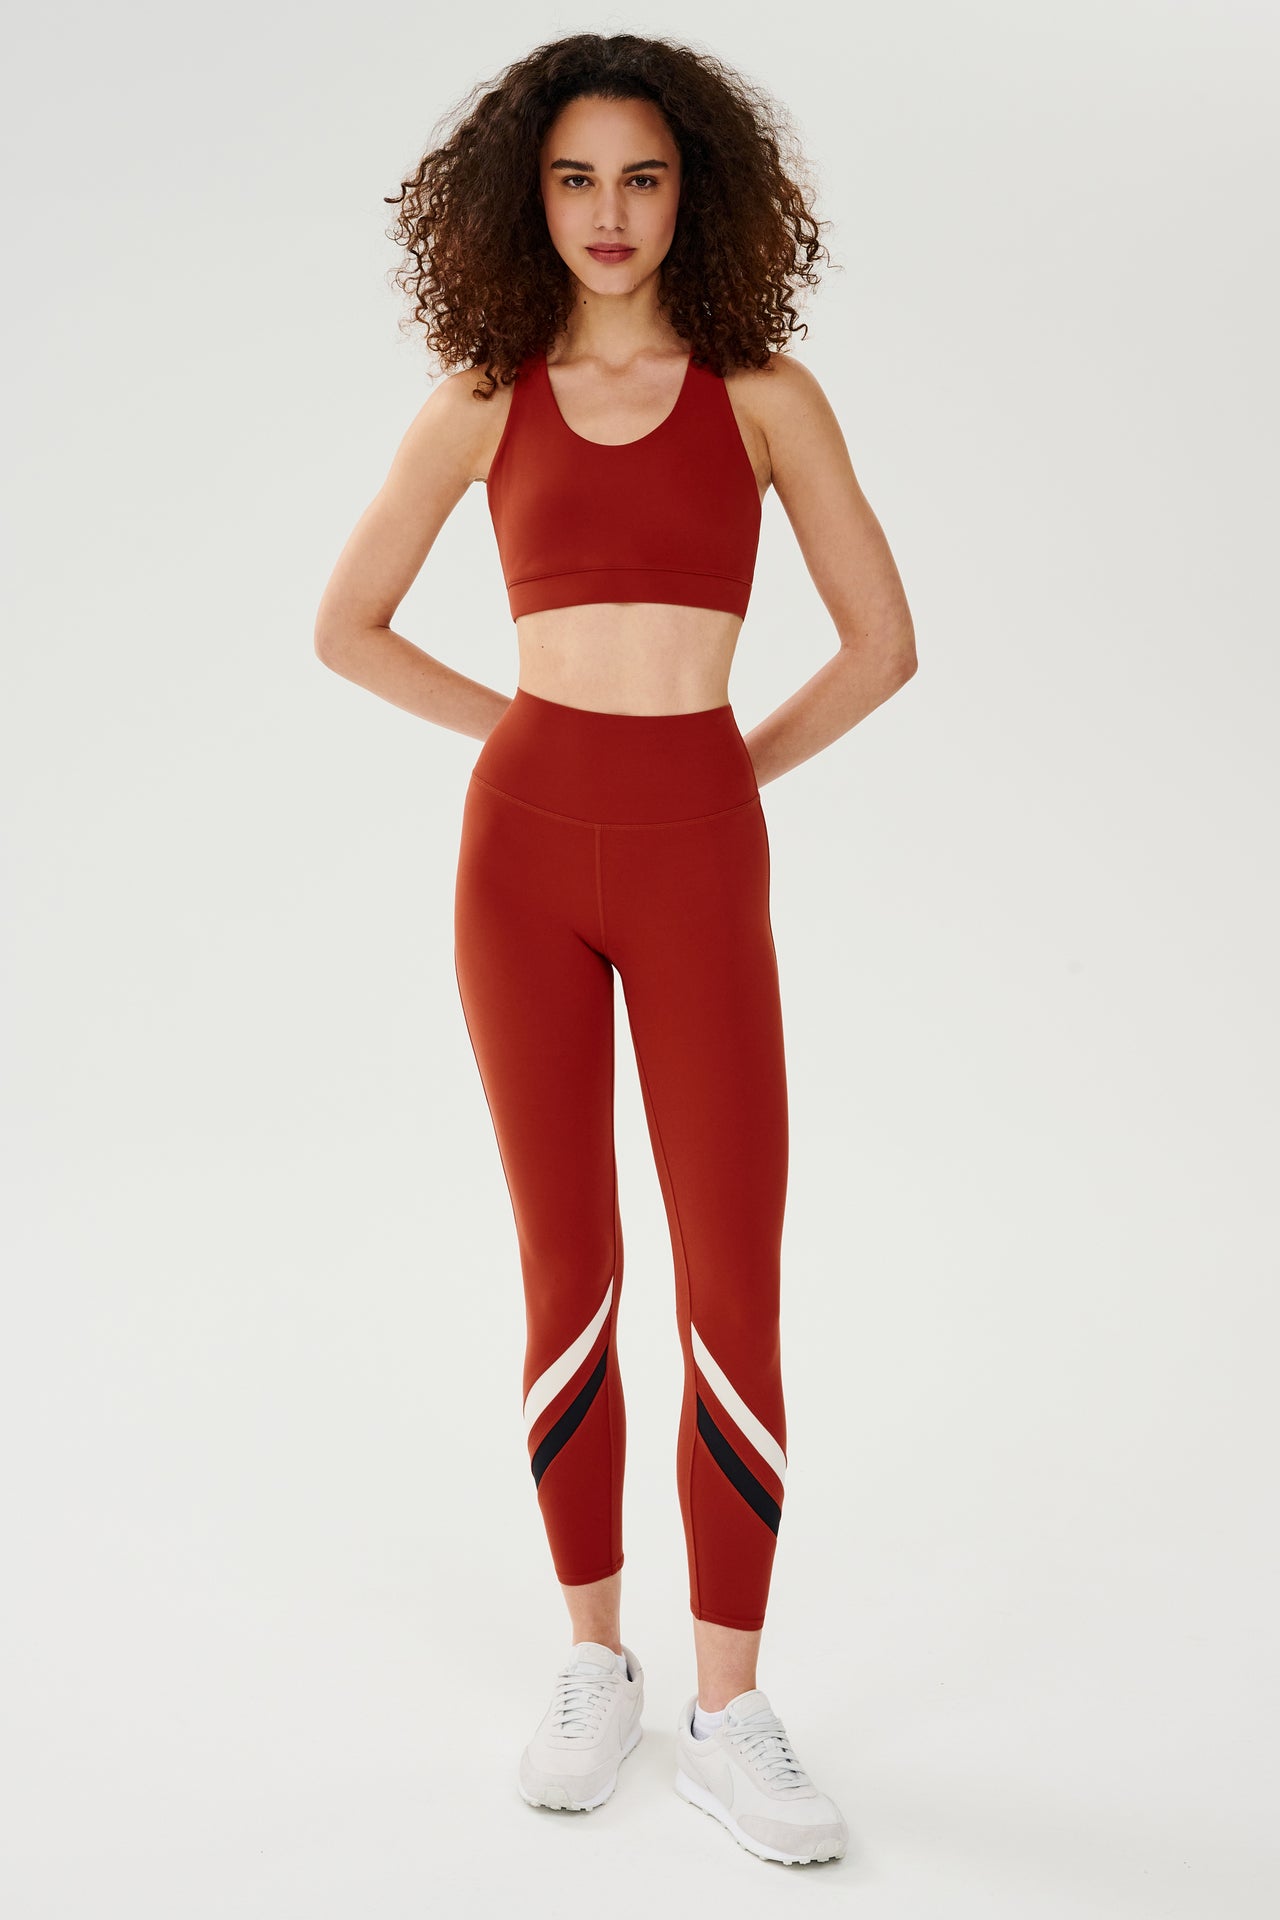 Full front view of girl wearing red thick straps sports bra with red leggings with black and white stripes on shins and white shoes